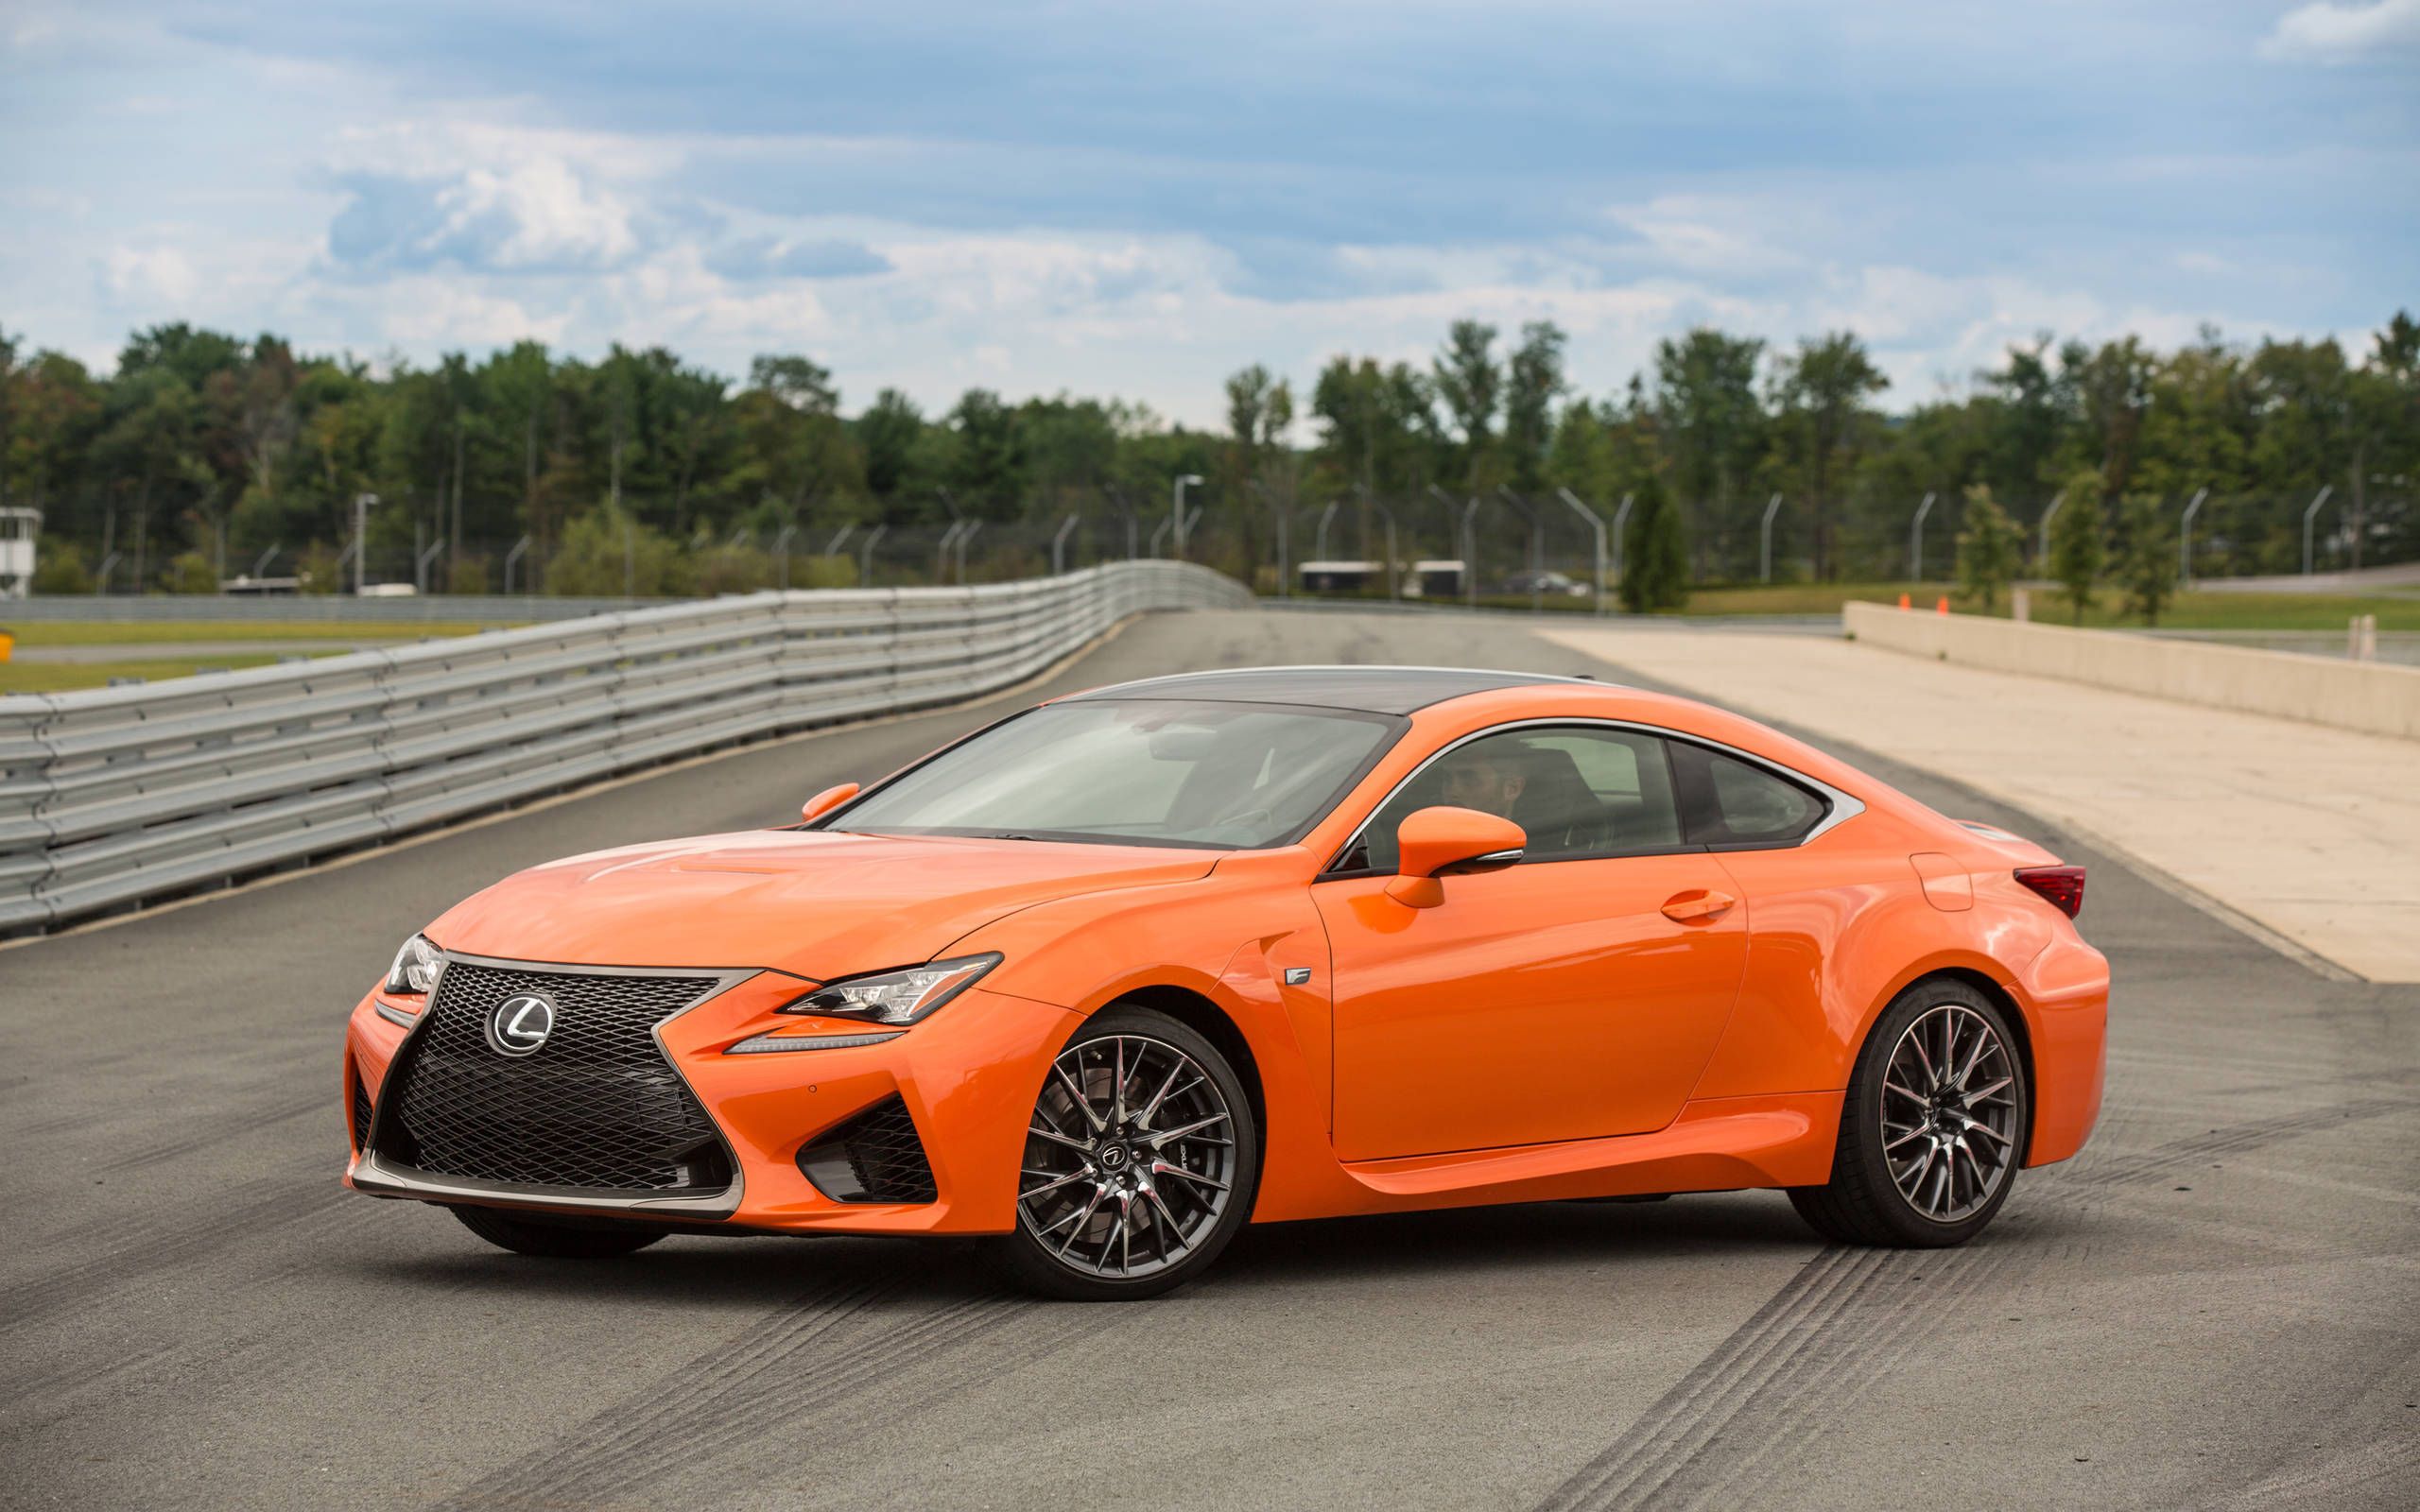 2016 Lexus RC-F review notes: A hot rod in a Japanese body